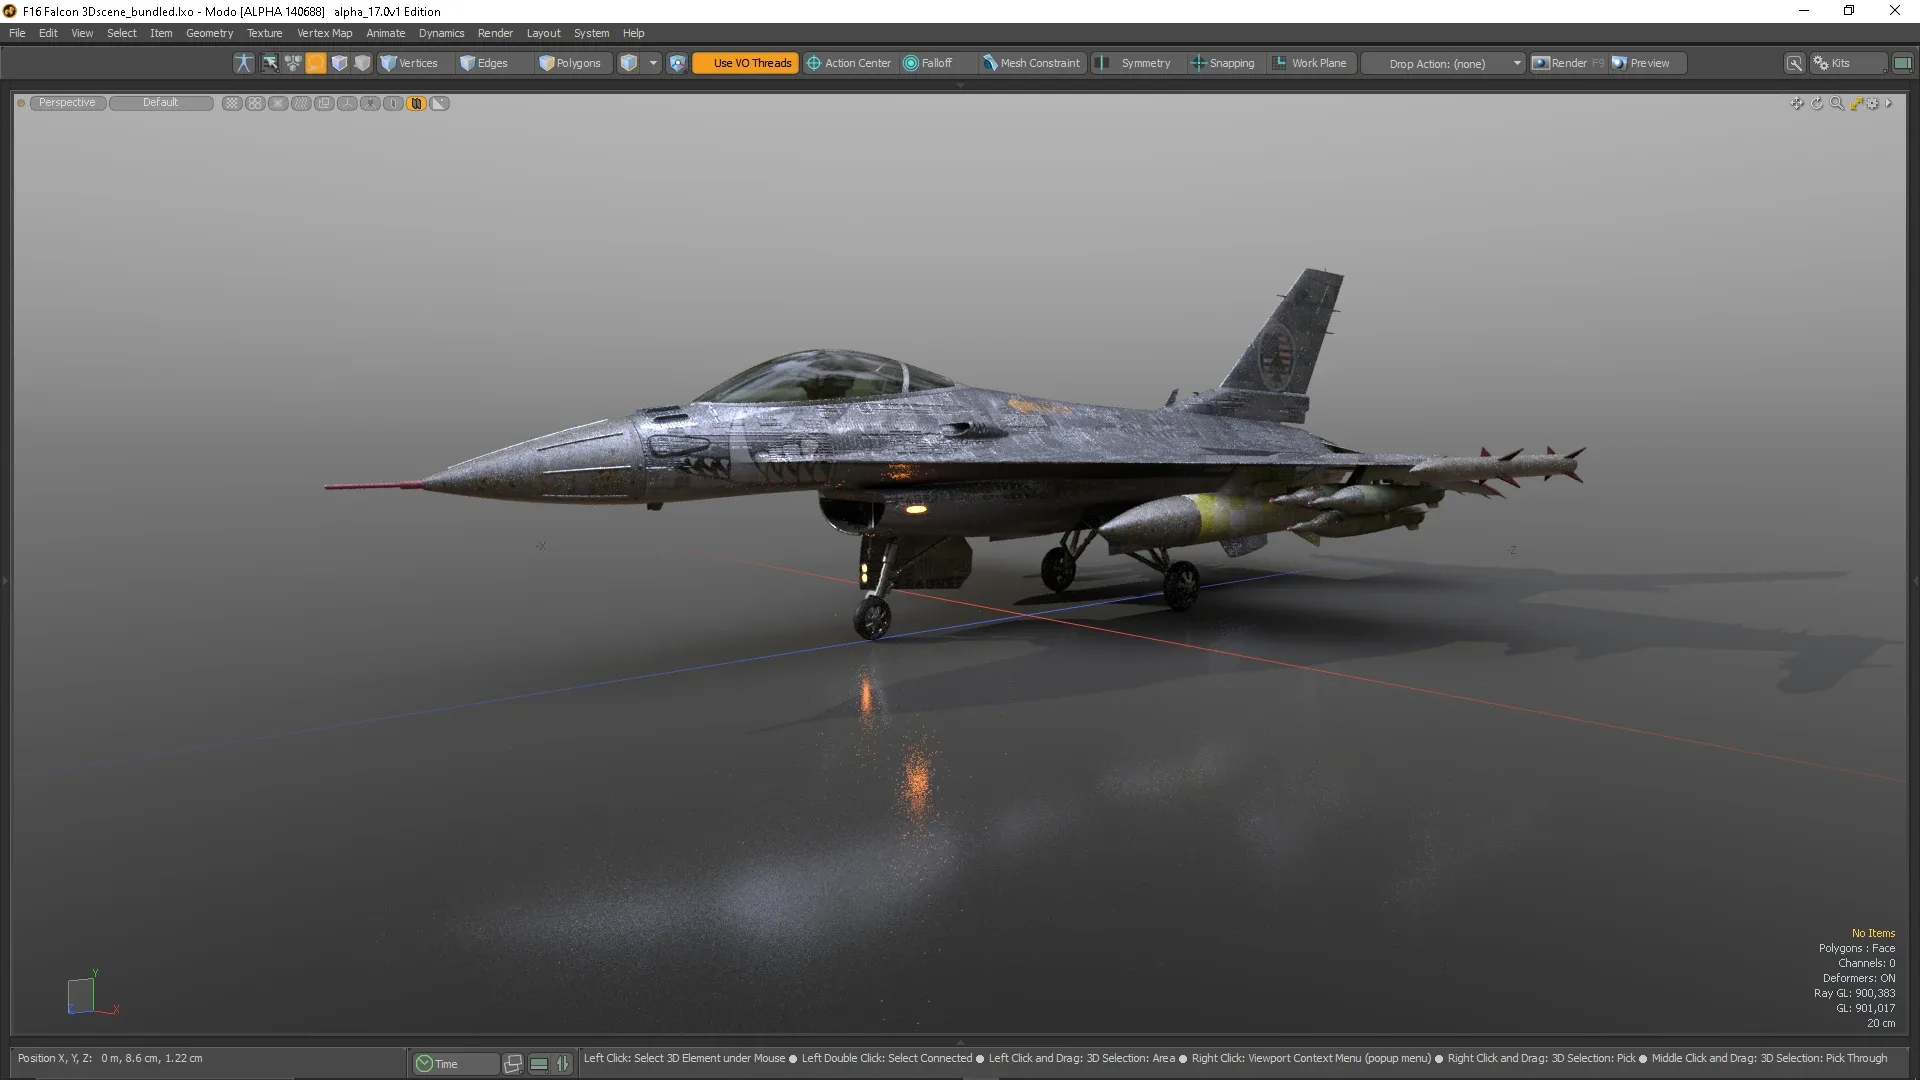 Plasticity 3D tutorial F16 falcon fighter full tutorial, take this!! You've never seen this on Plasticity 3d, you won't regret it!!!